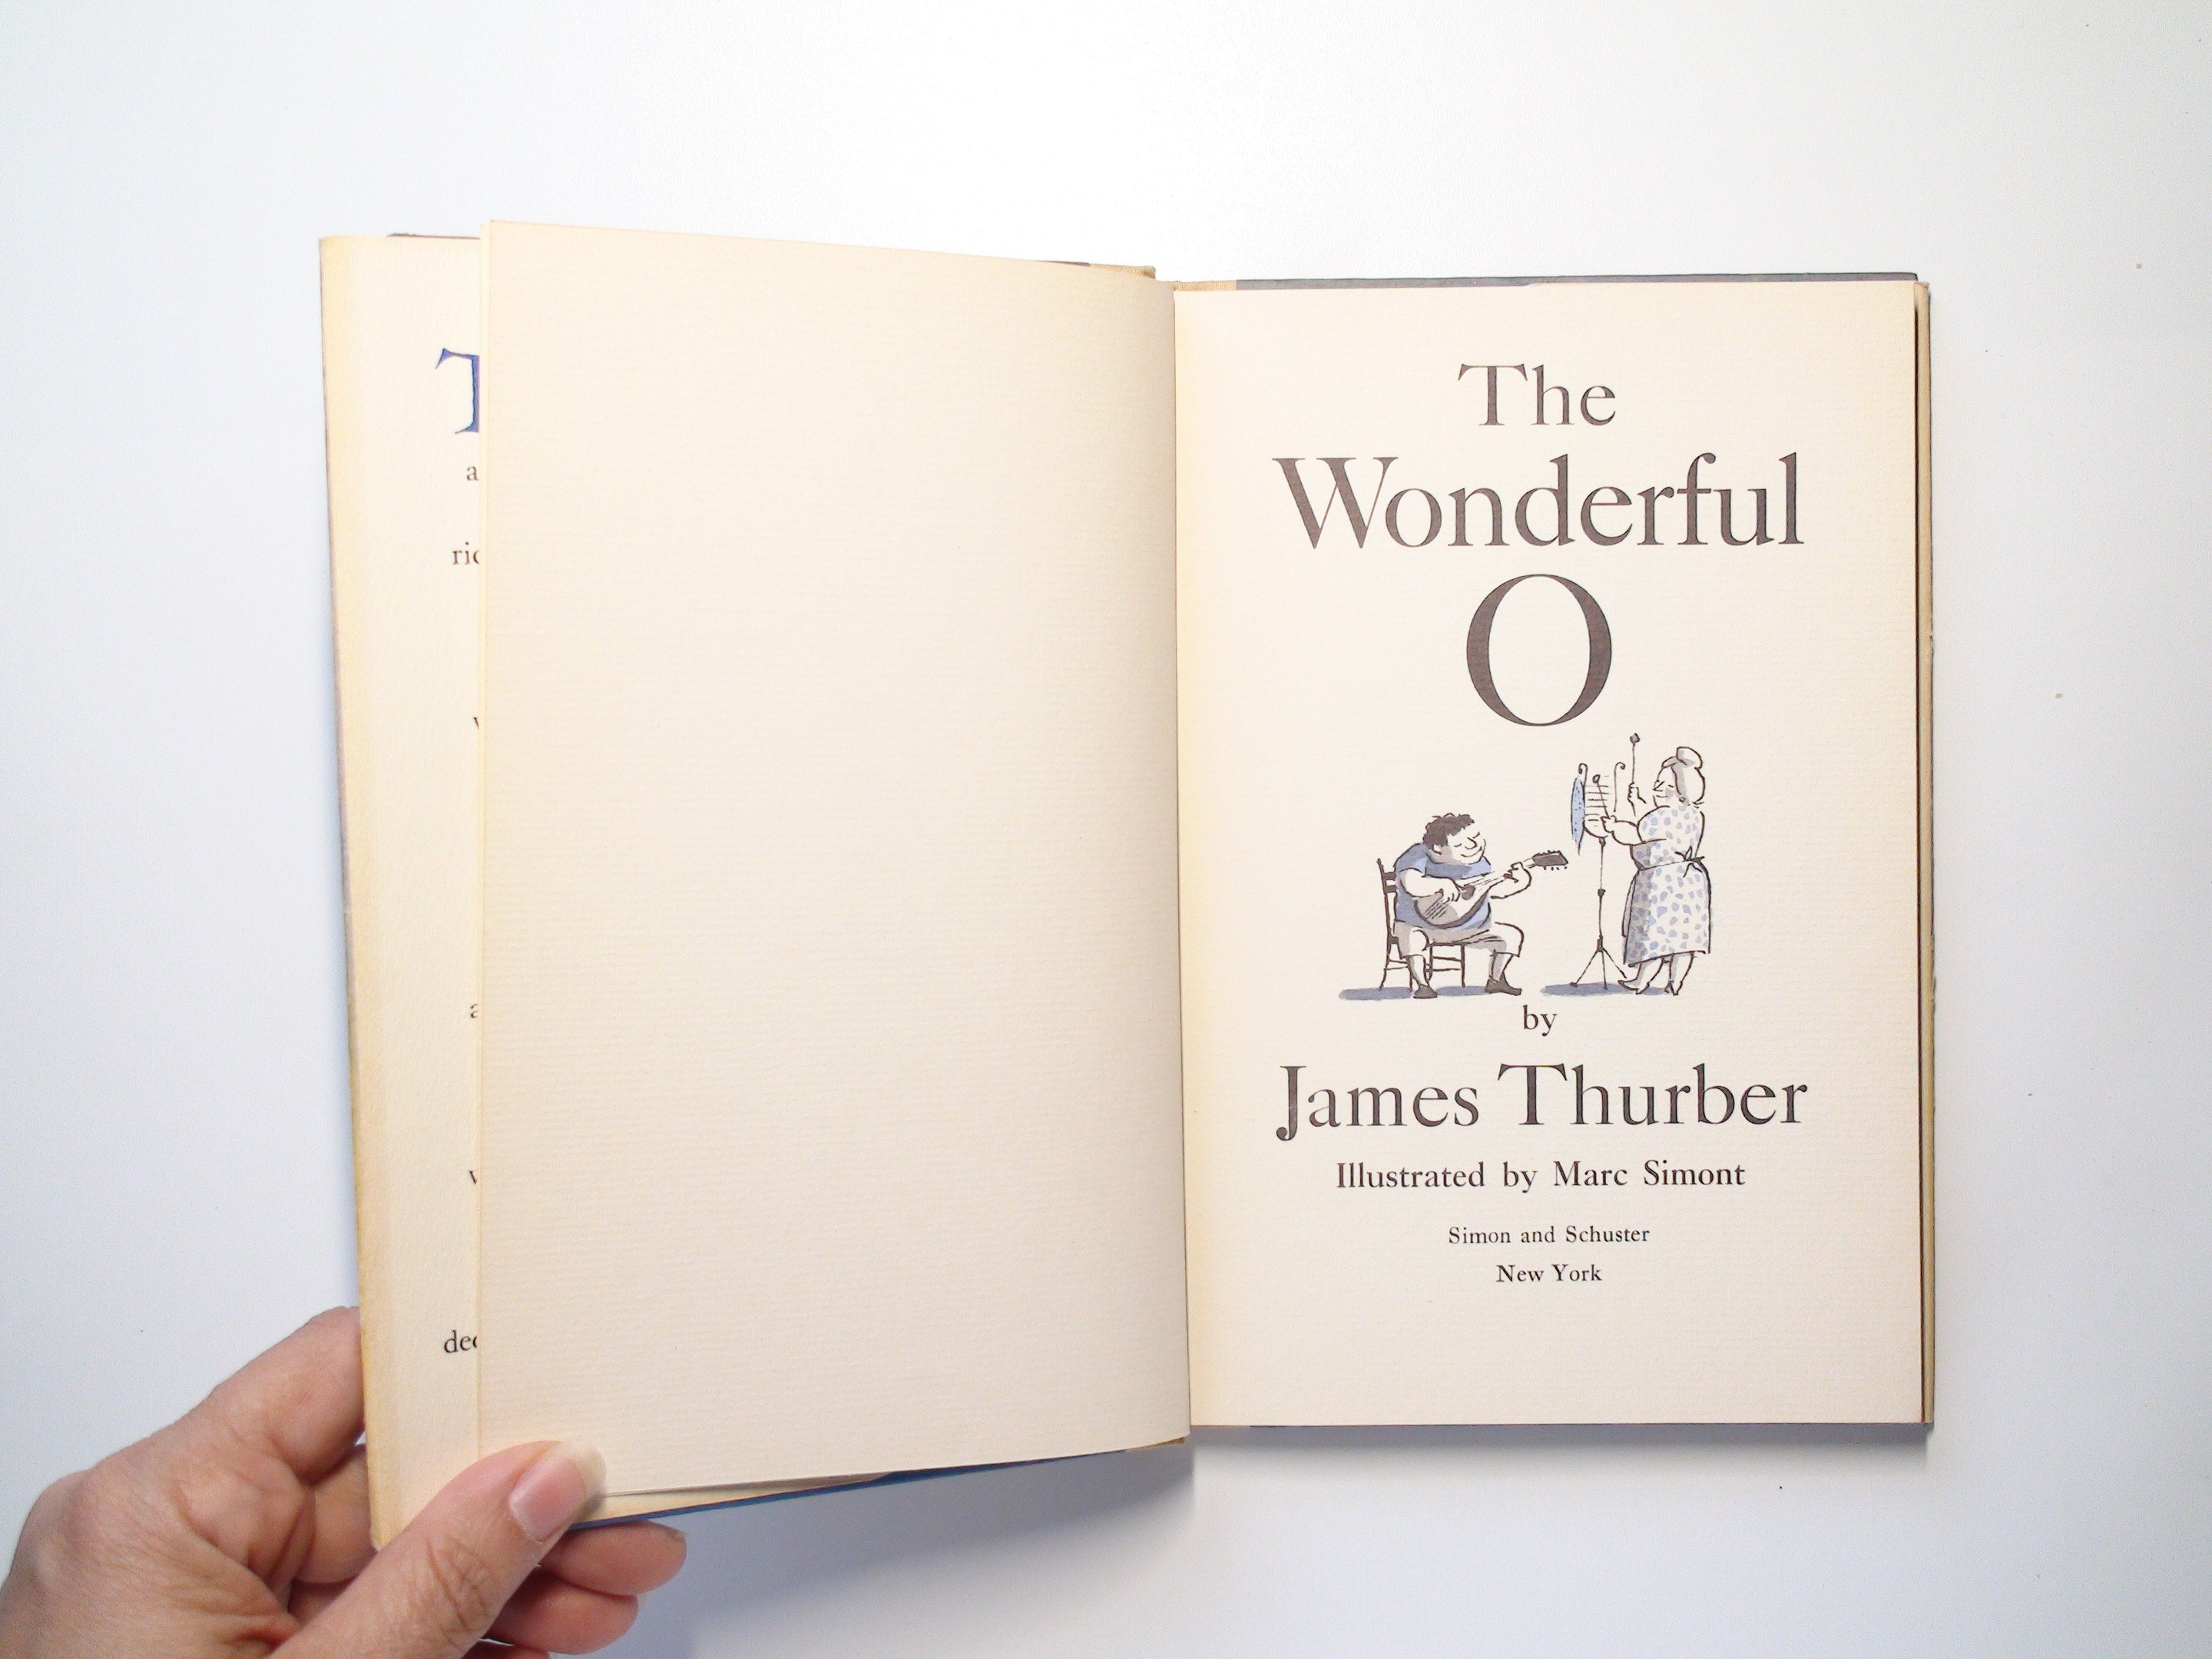 The Wonderful O, by James Thurber, Illustrated by Marc Simont, 1st Ed, 1957